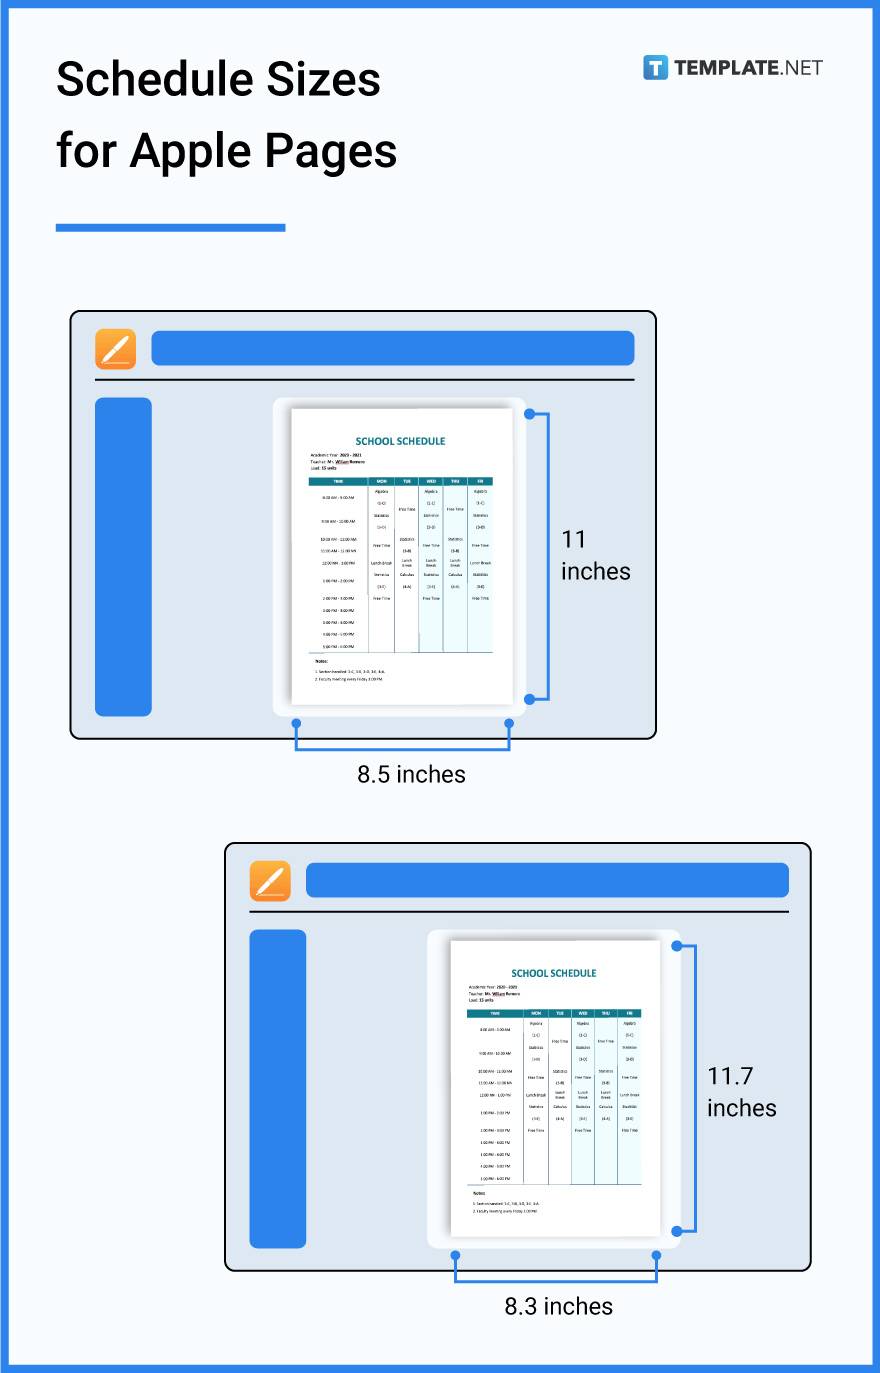 schedule-sizes-for-apple-pages